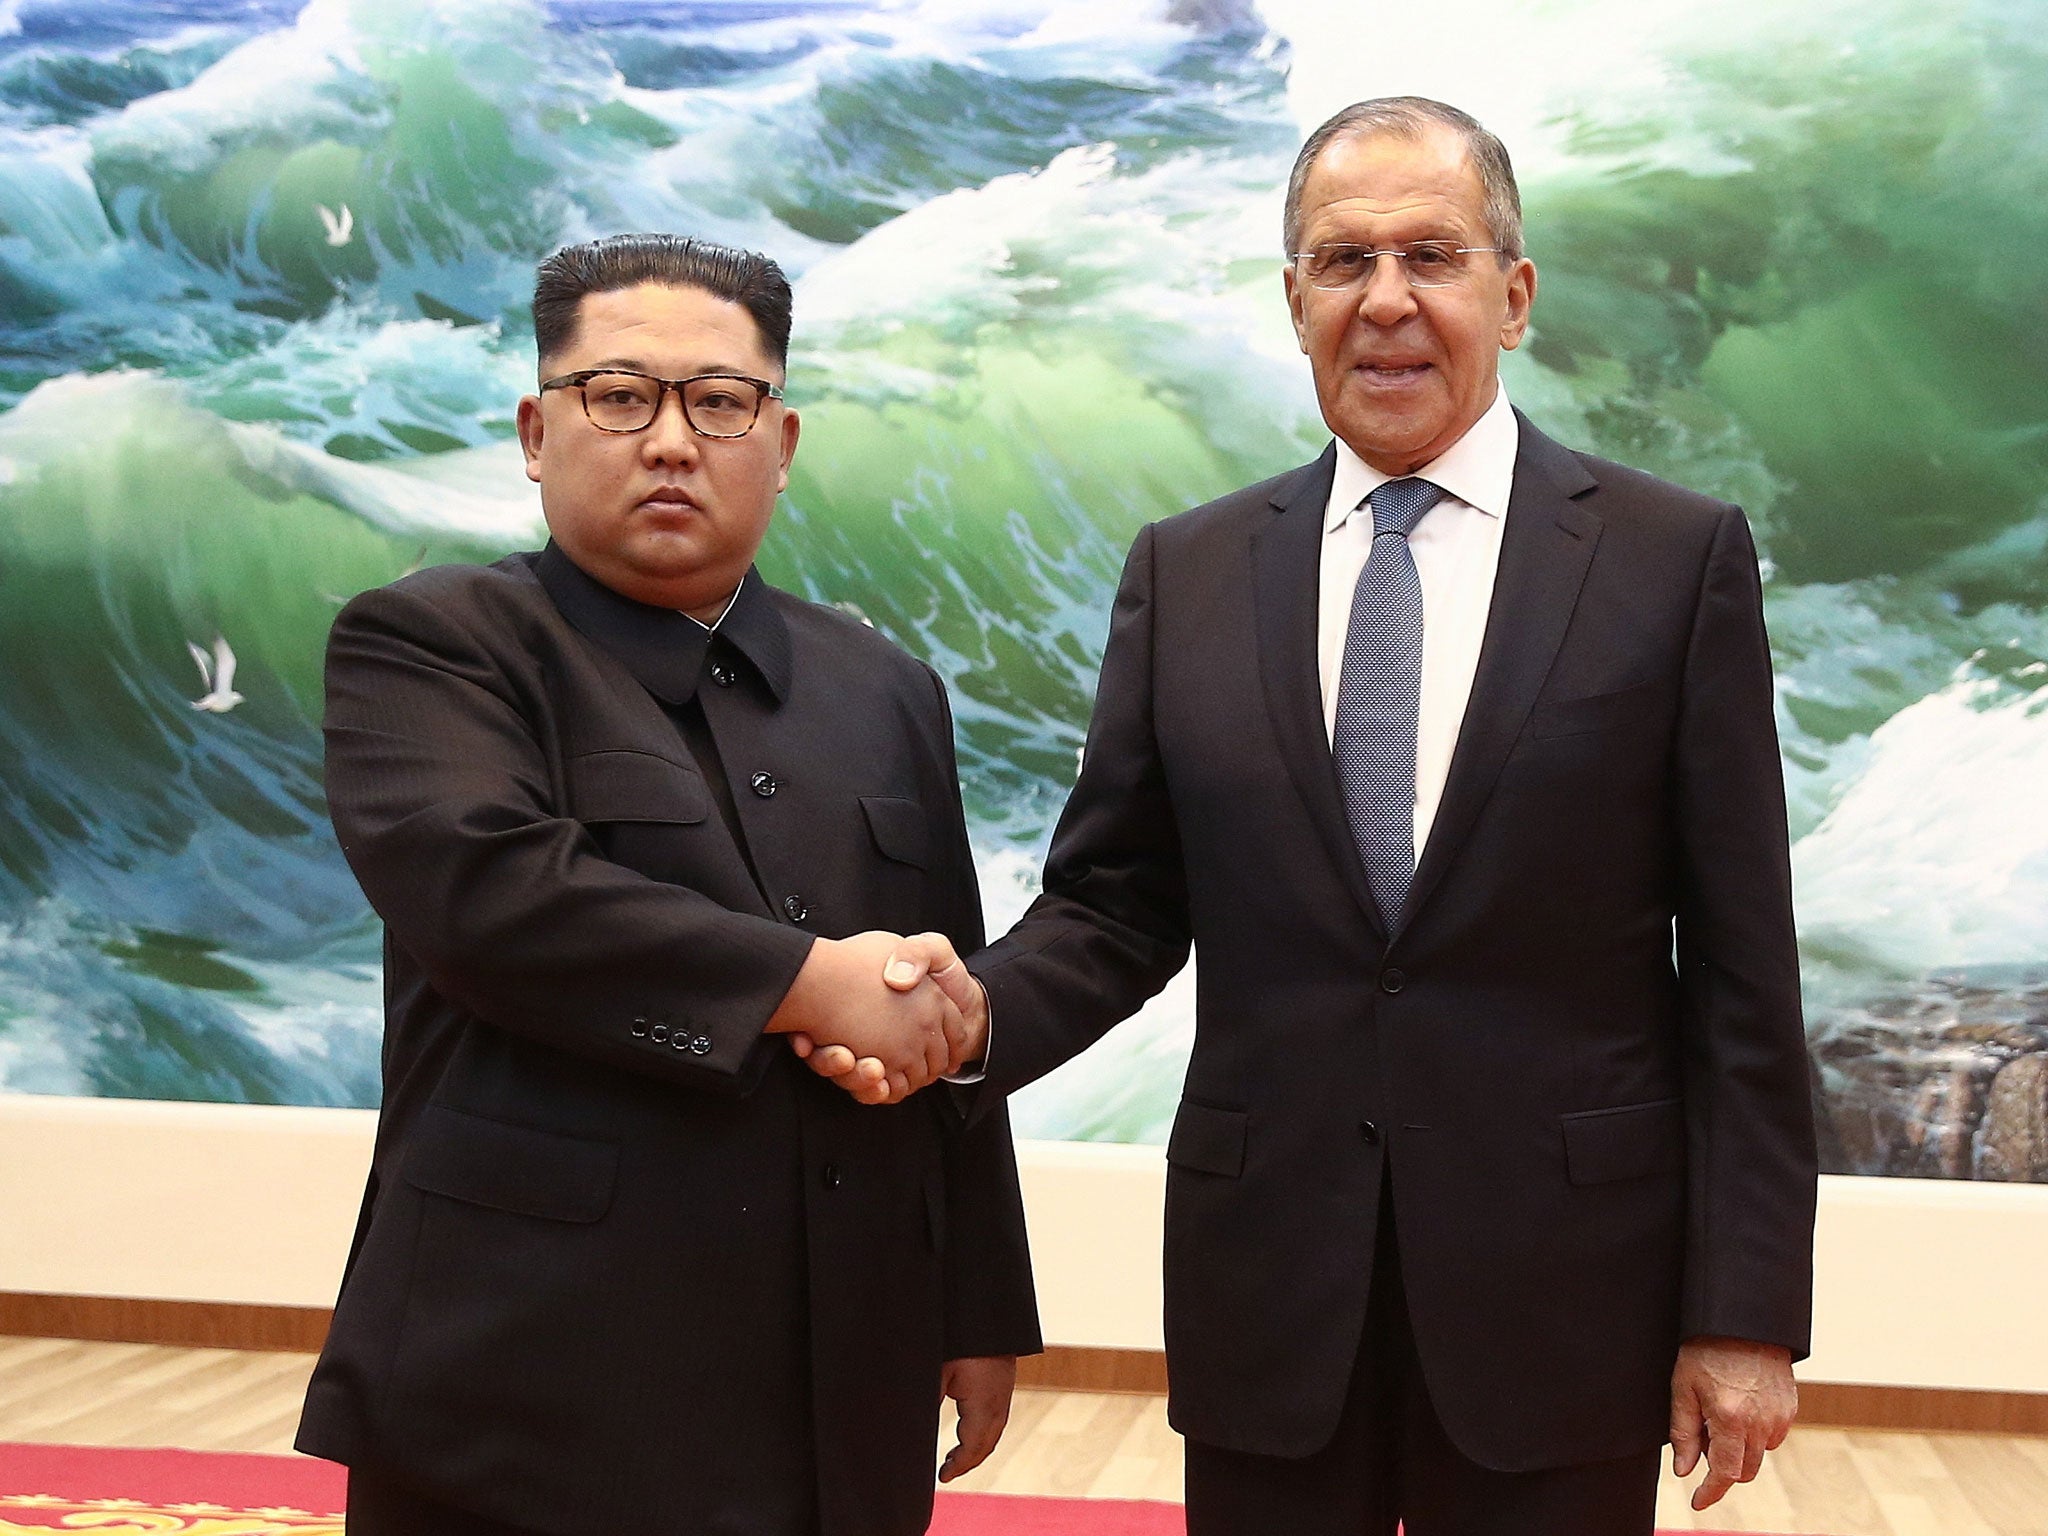 North Korea's leader, Kim Jong-un, shakes hands with Russia's foreign minister, Sergei Lavrov, as he visits Pyongyang for an official visit